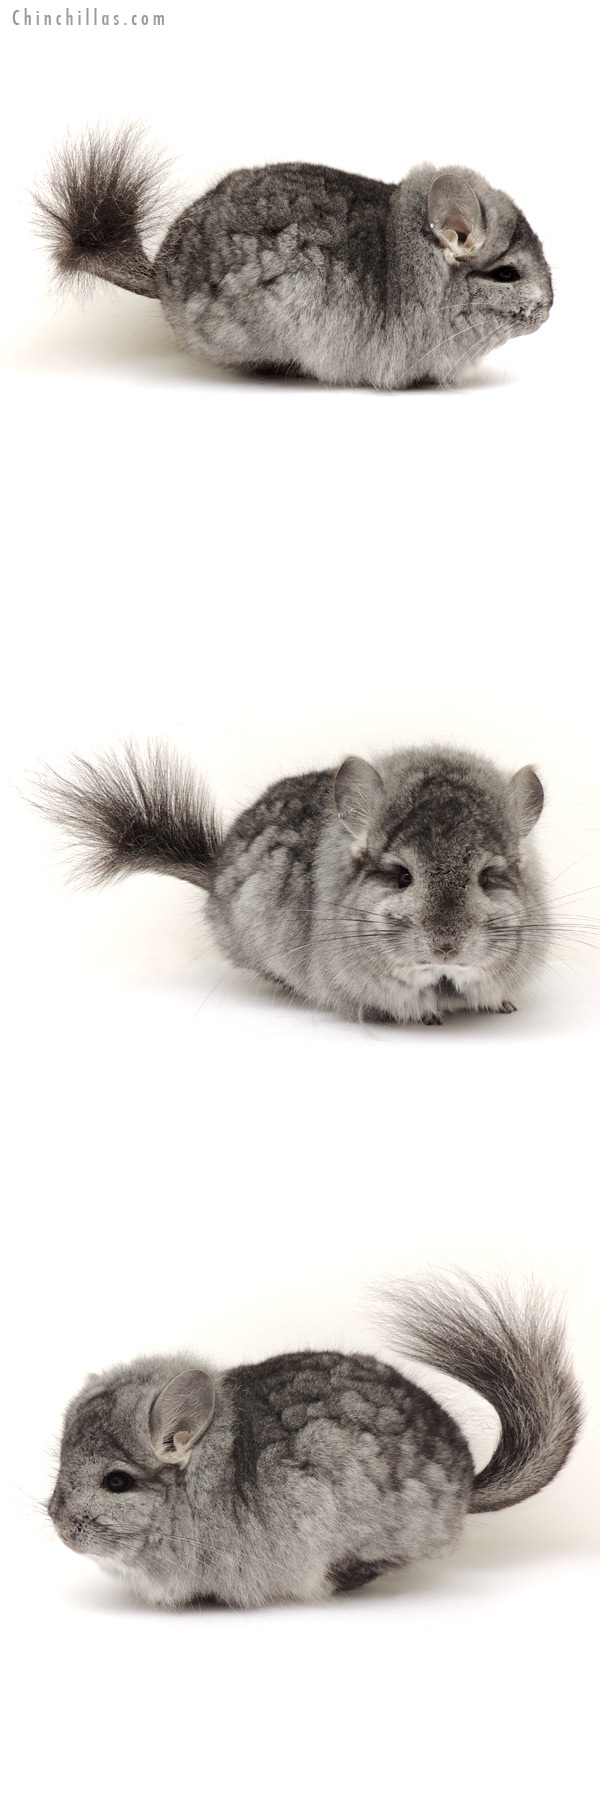 Chinchilla or related item offered for sale or export on Chinchillas.com - 14117 Standard Royal Persian Angora Male Chinchilla